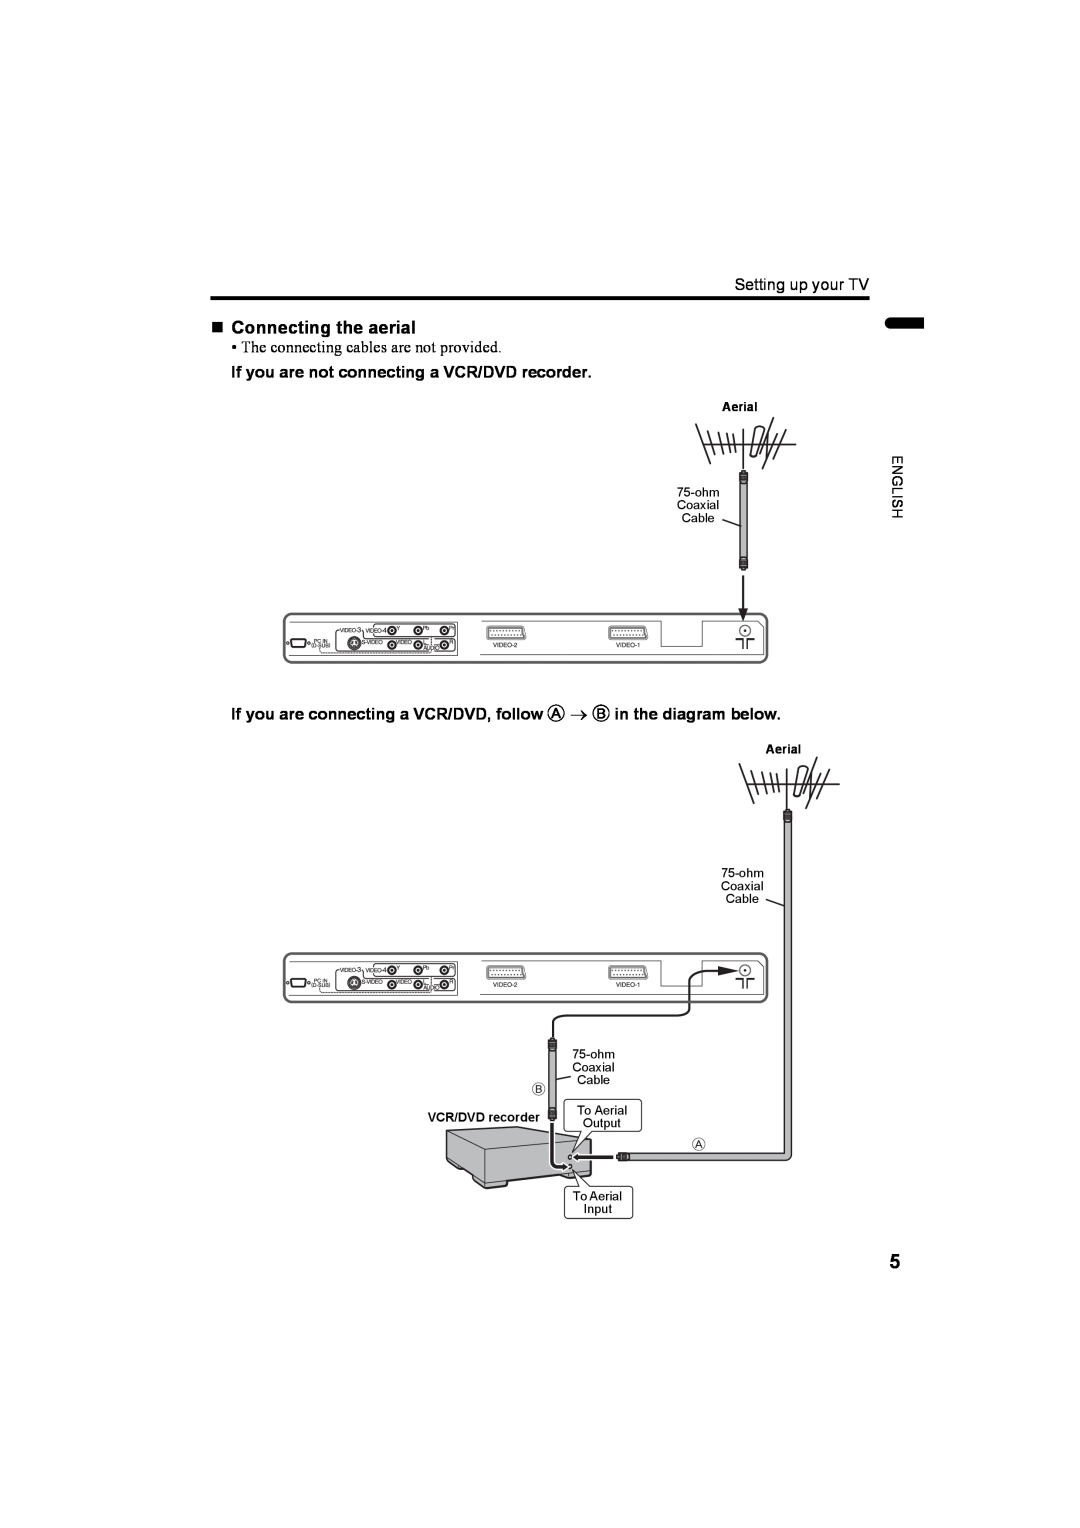 JVC LT-32AX5 manual „ Connecting the aerial, If you are not connecting a VCR/DVD recorder, ohm Coaxial Cable, To Aerial 